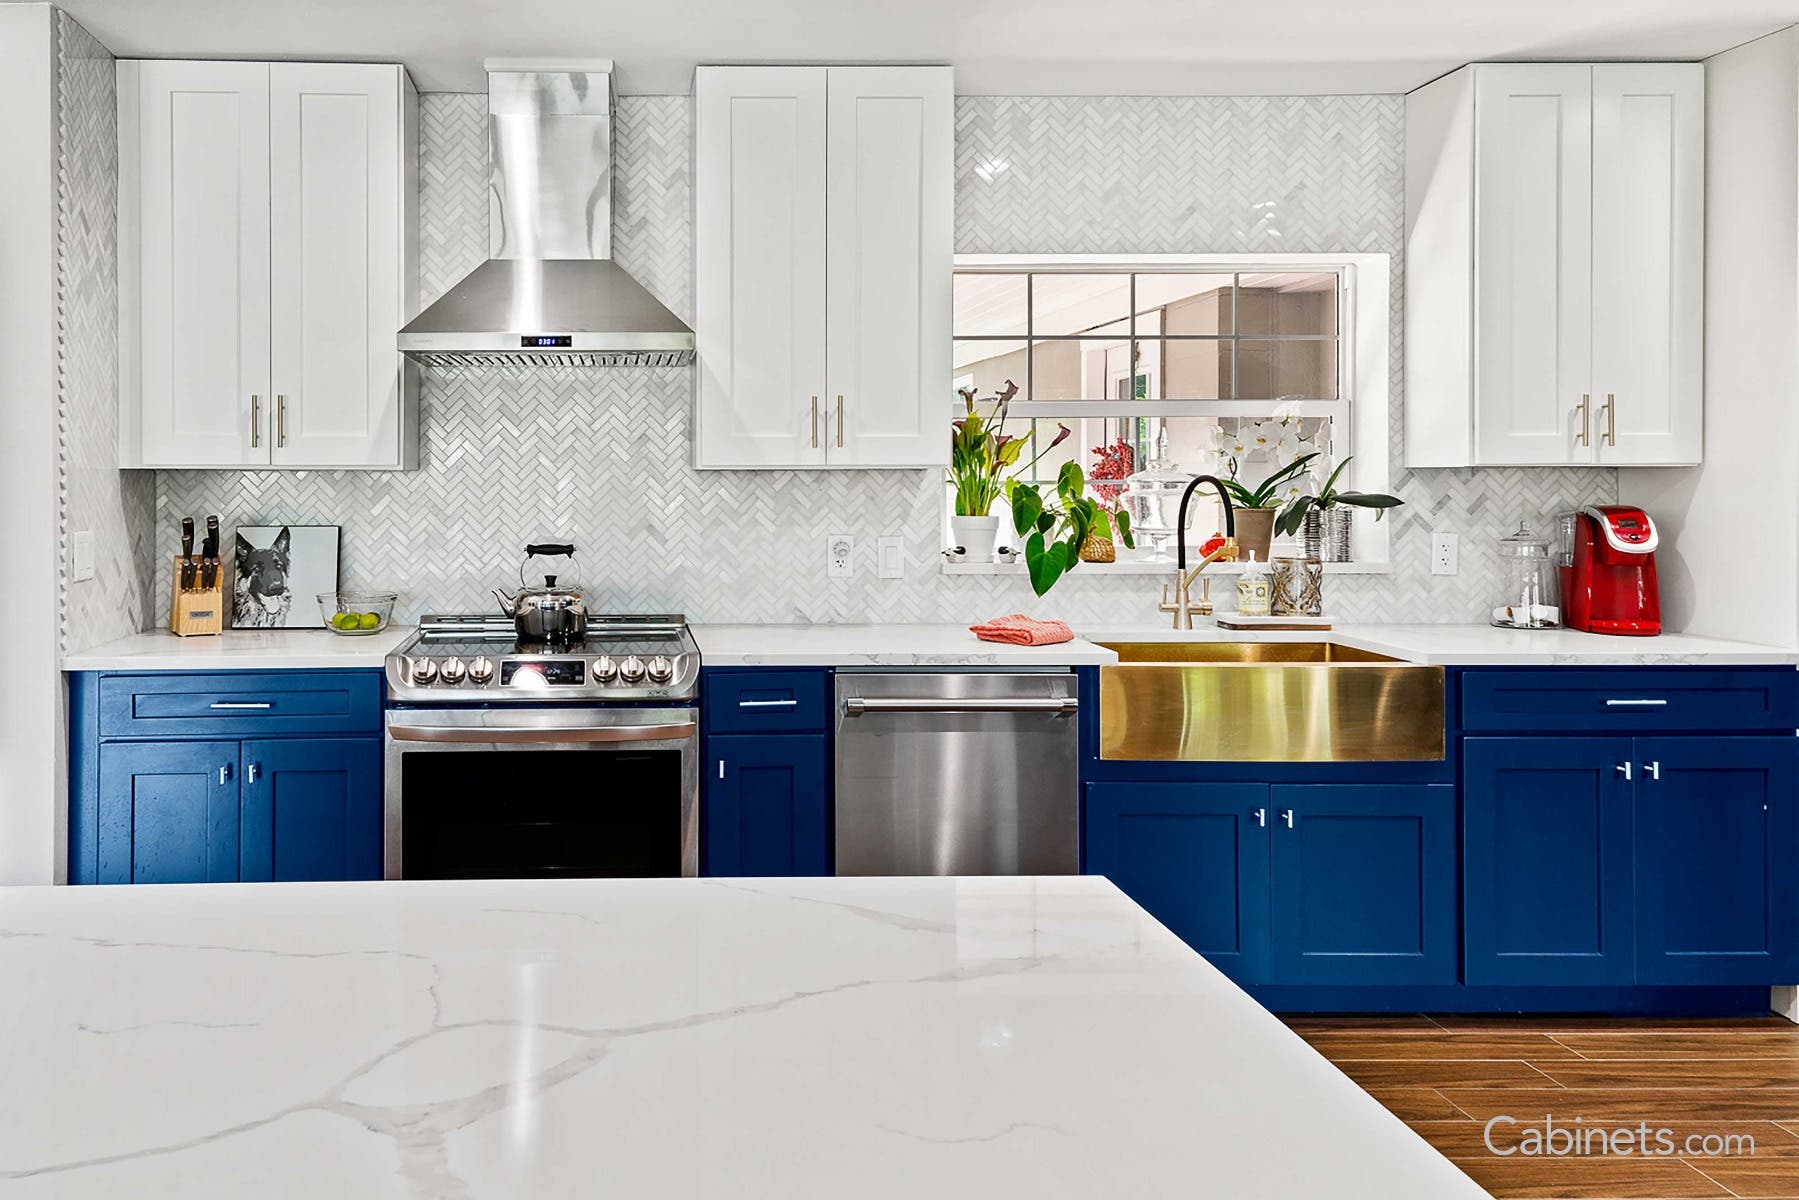 Bright white and naval cabinets with gold farmhouse sink